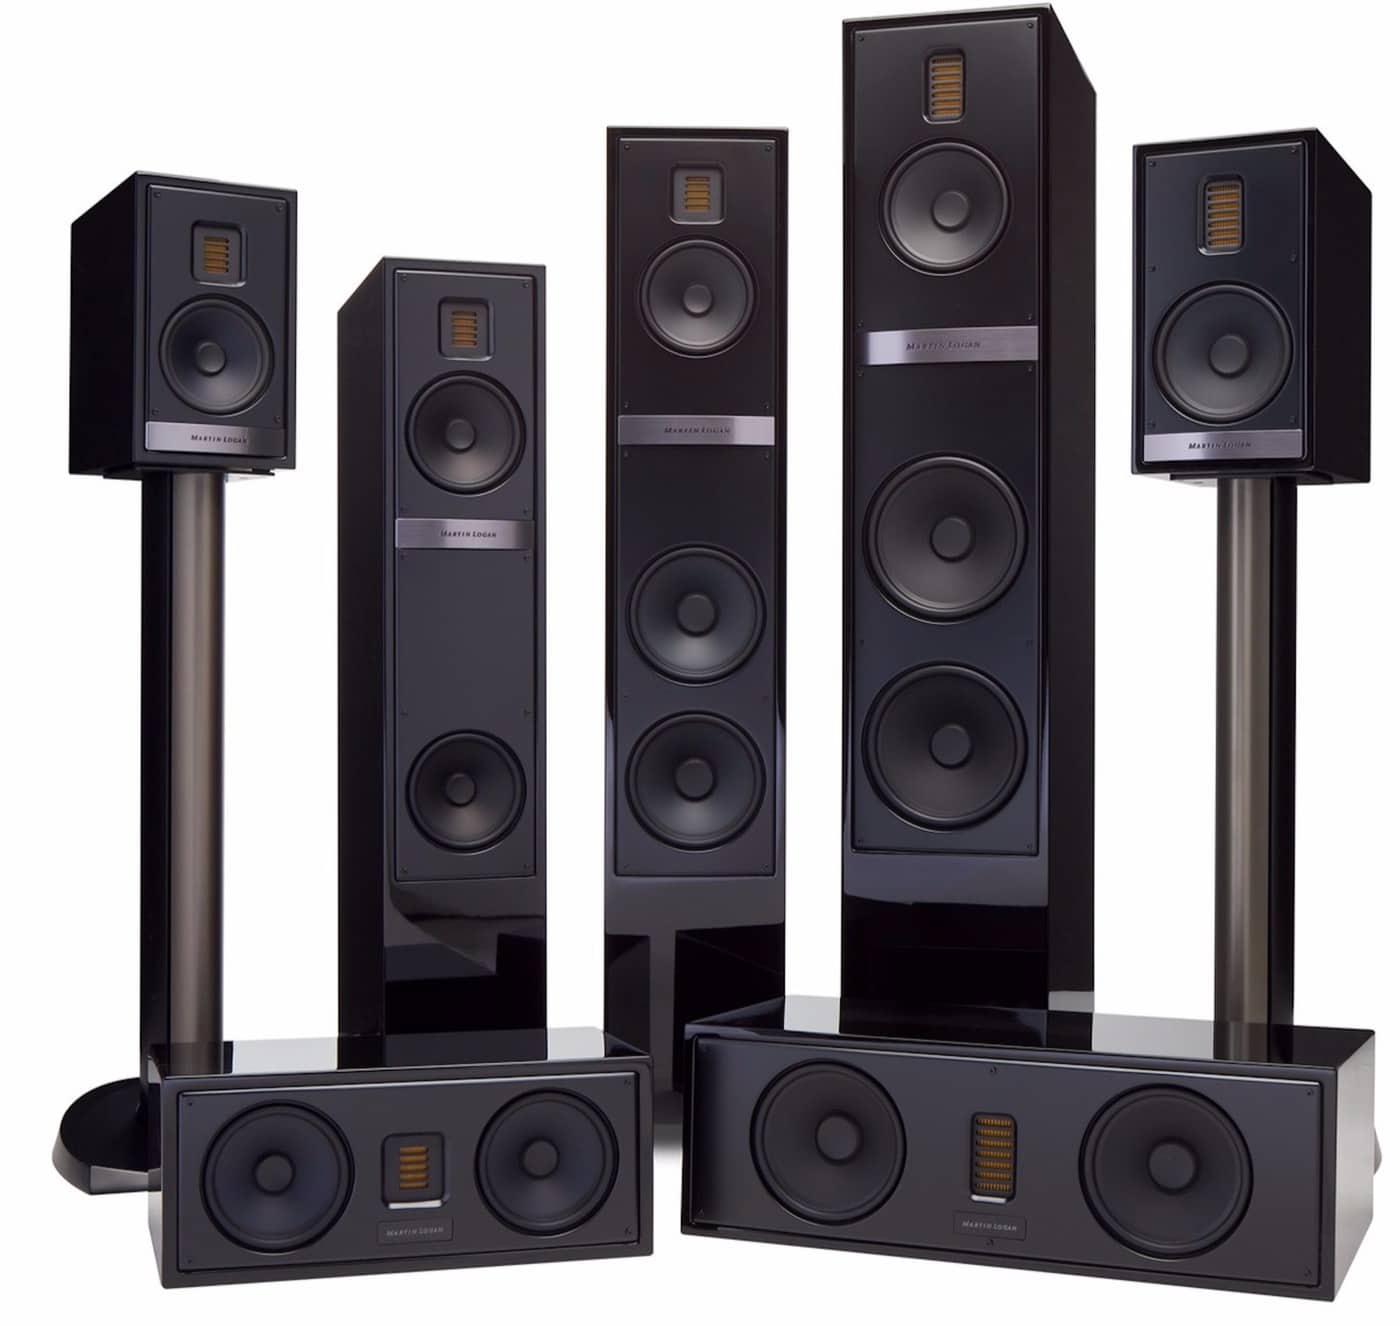 Motion Speakers From Martin Logan